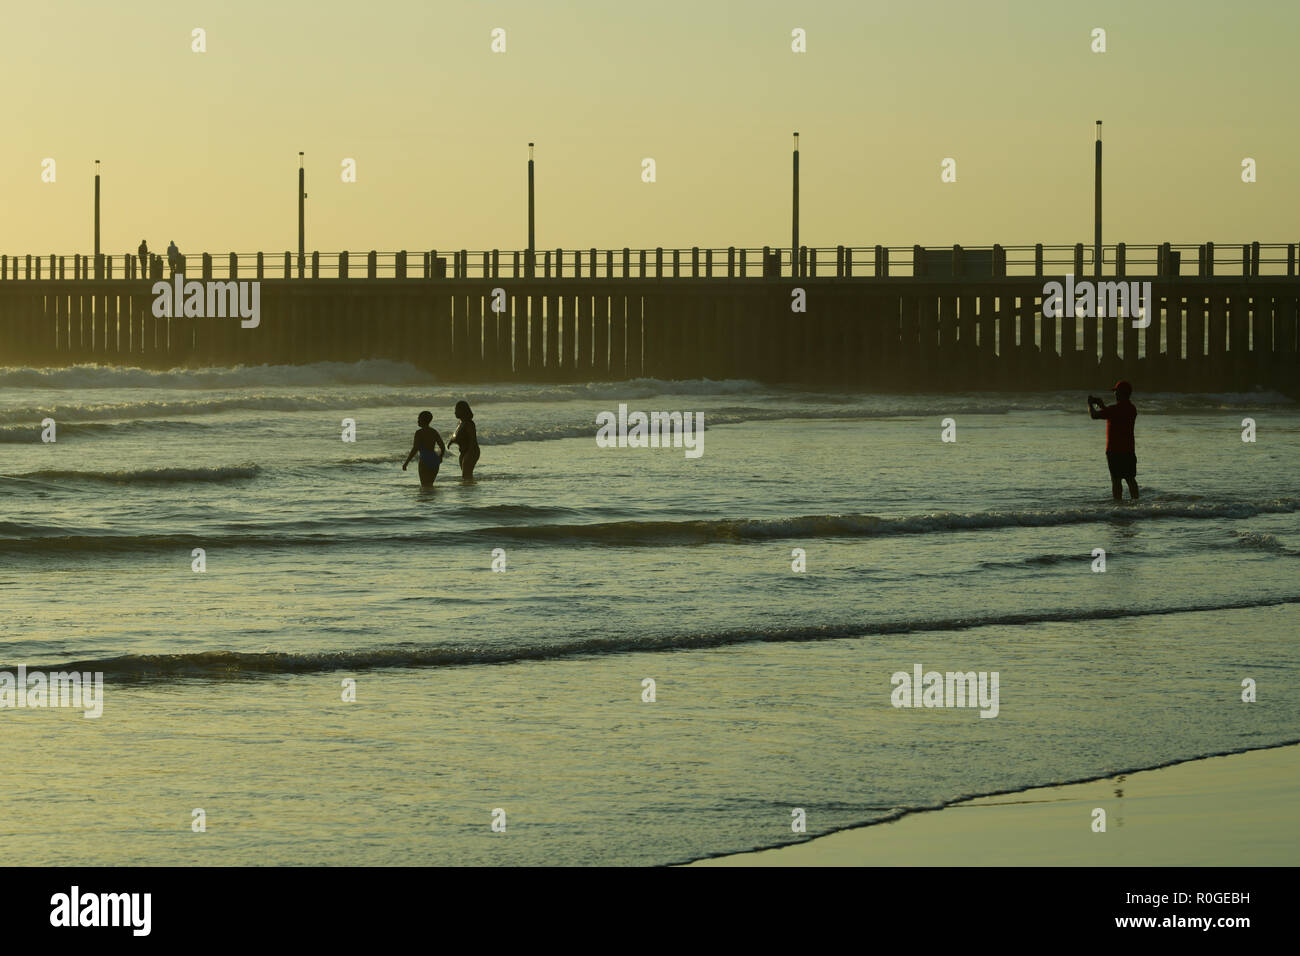 Durban, KwaZulu-Natal, South Africa, single adult male taking photo of two women standing in water while on seaside holiday at beachfront Stock Photo